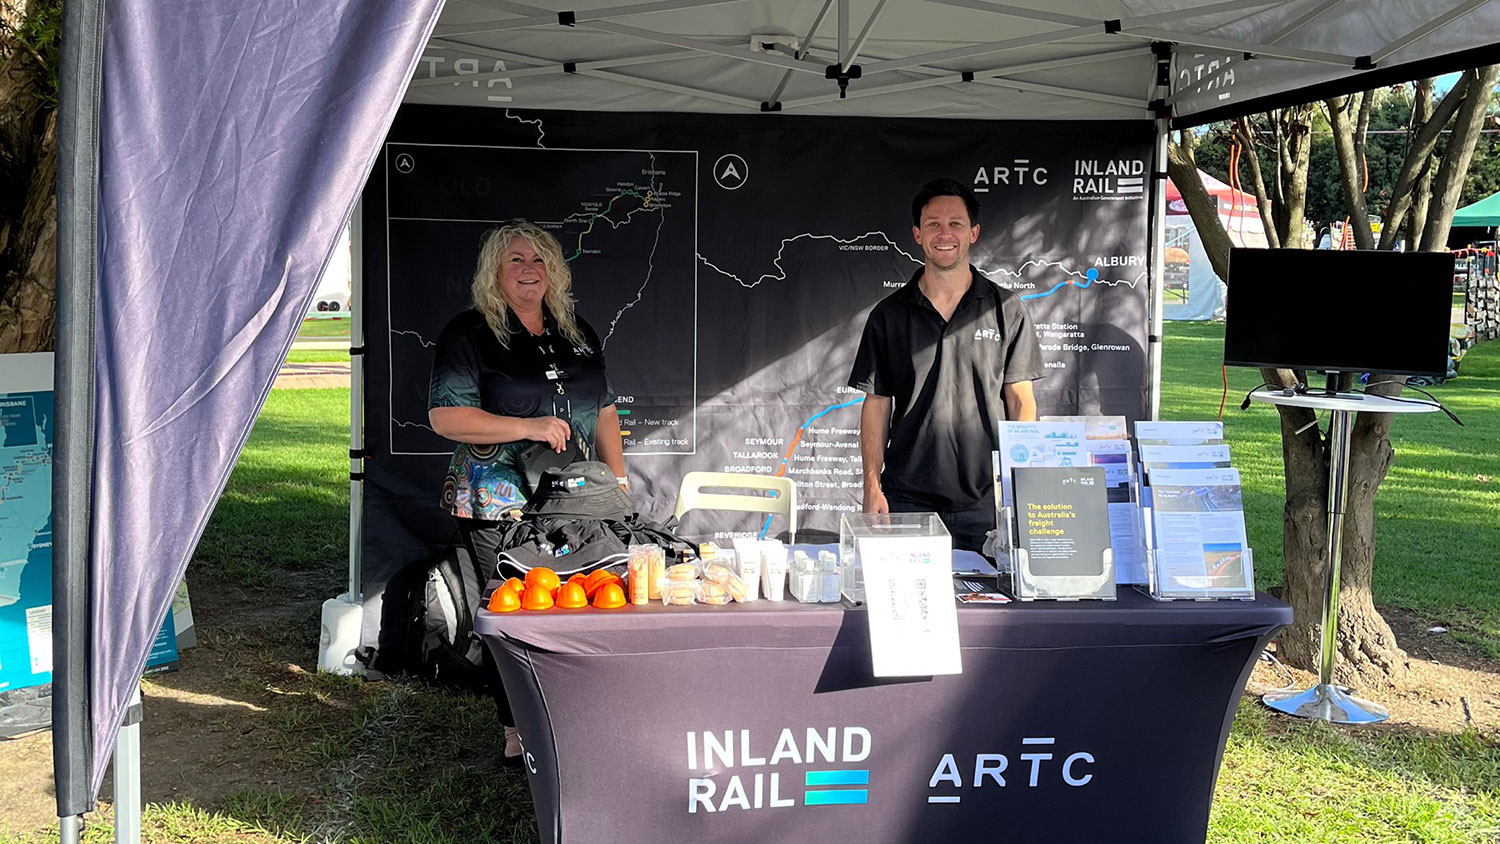 Image of Inland Rail staff, Jacinta Piazza and Hamish Pink, at the Inland Rail stand for the Seymour Expo.